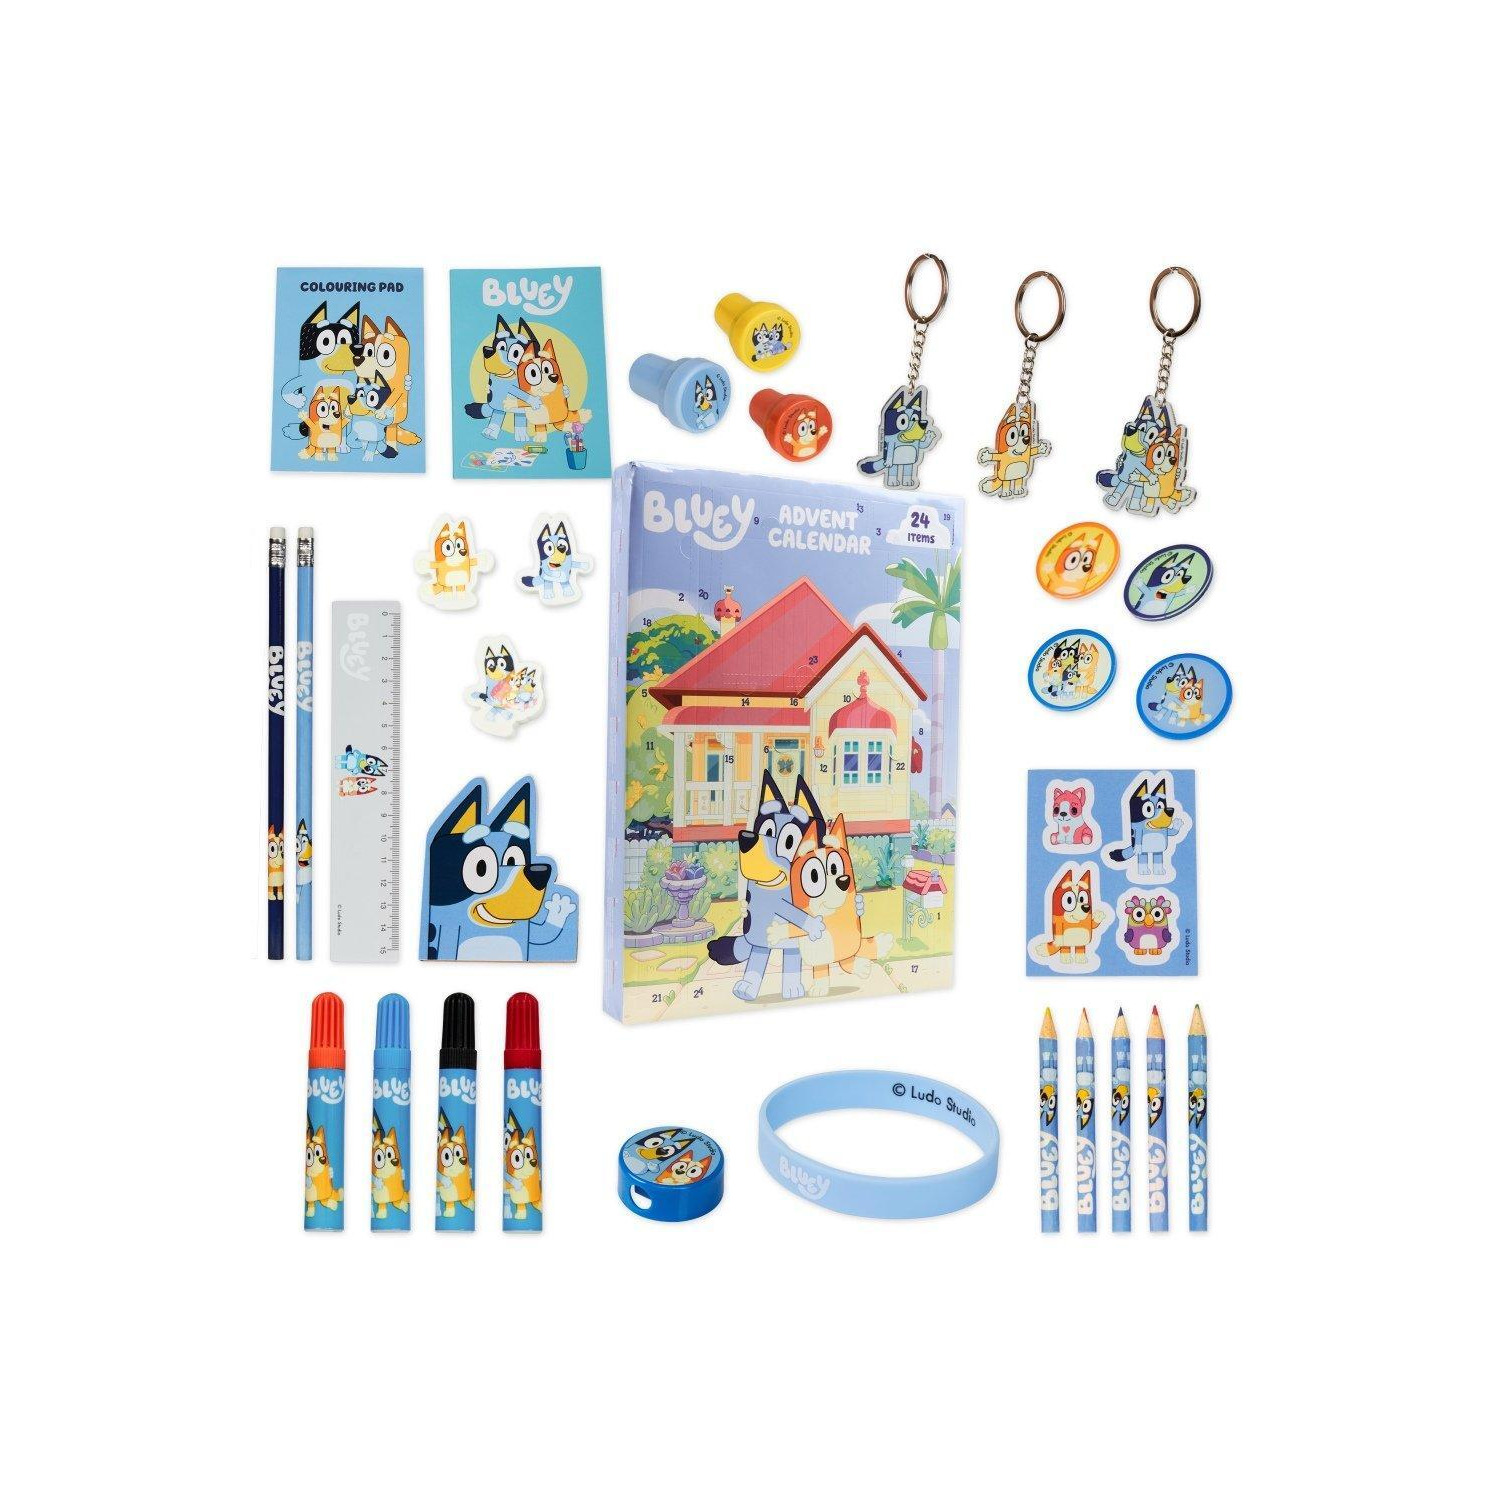 Advent Calendar With Stationery And Accessories - image 1